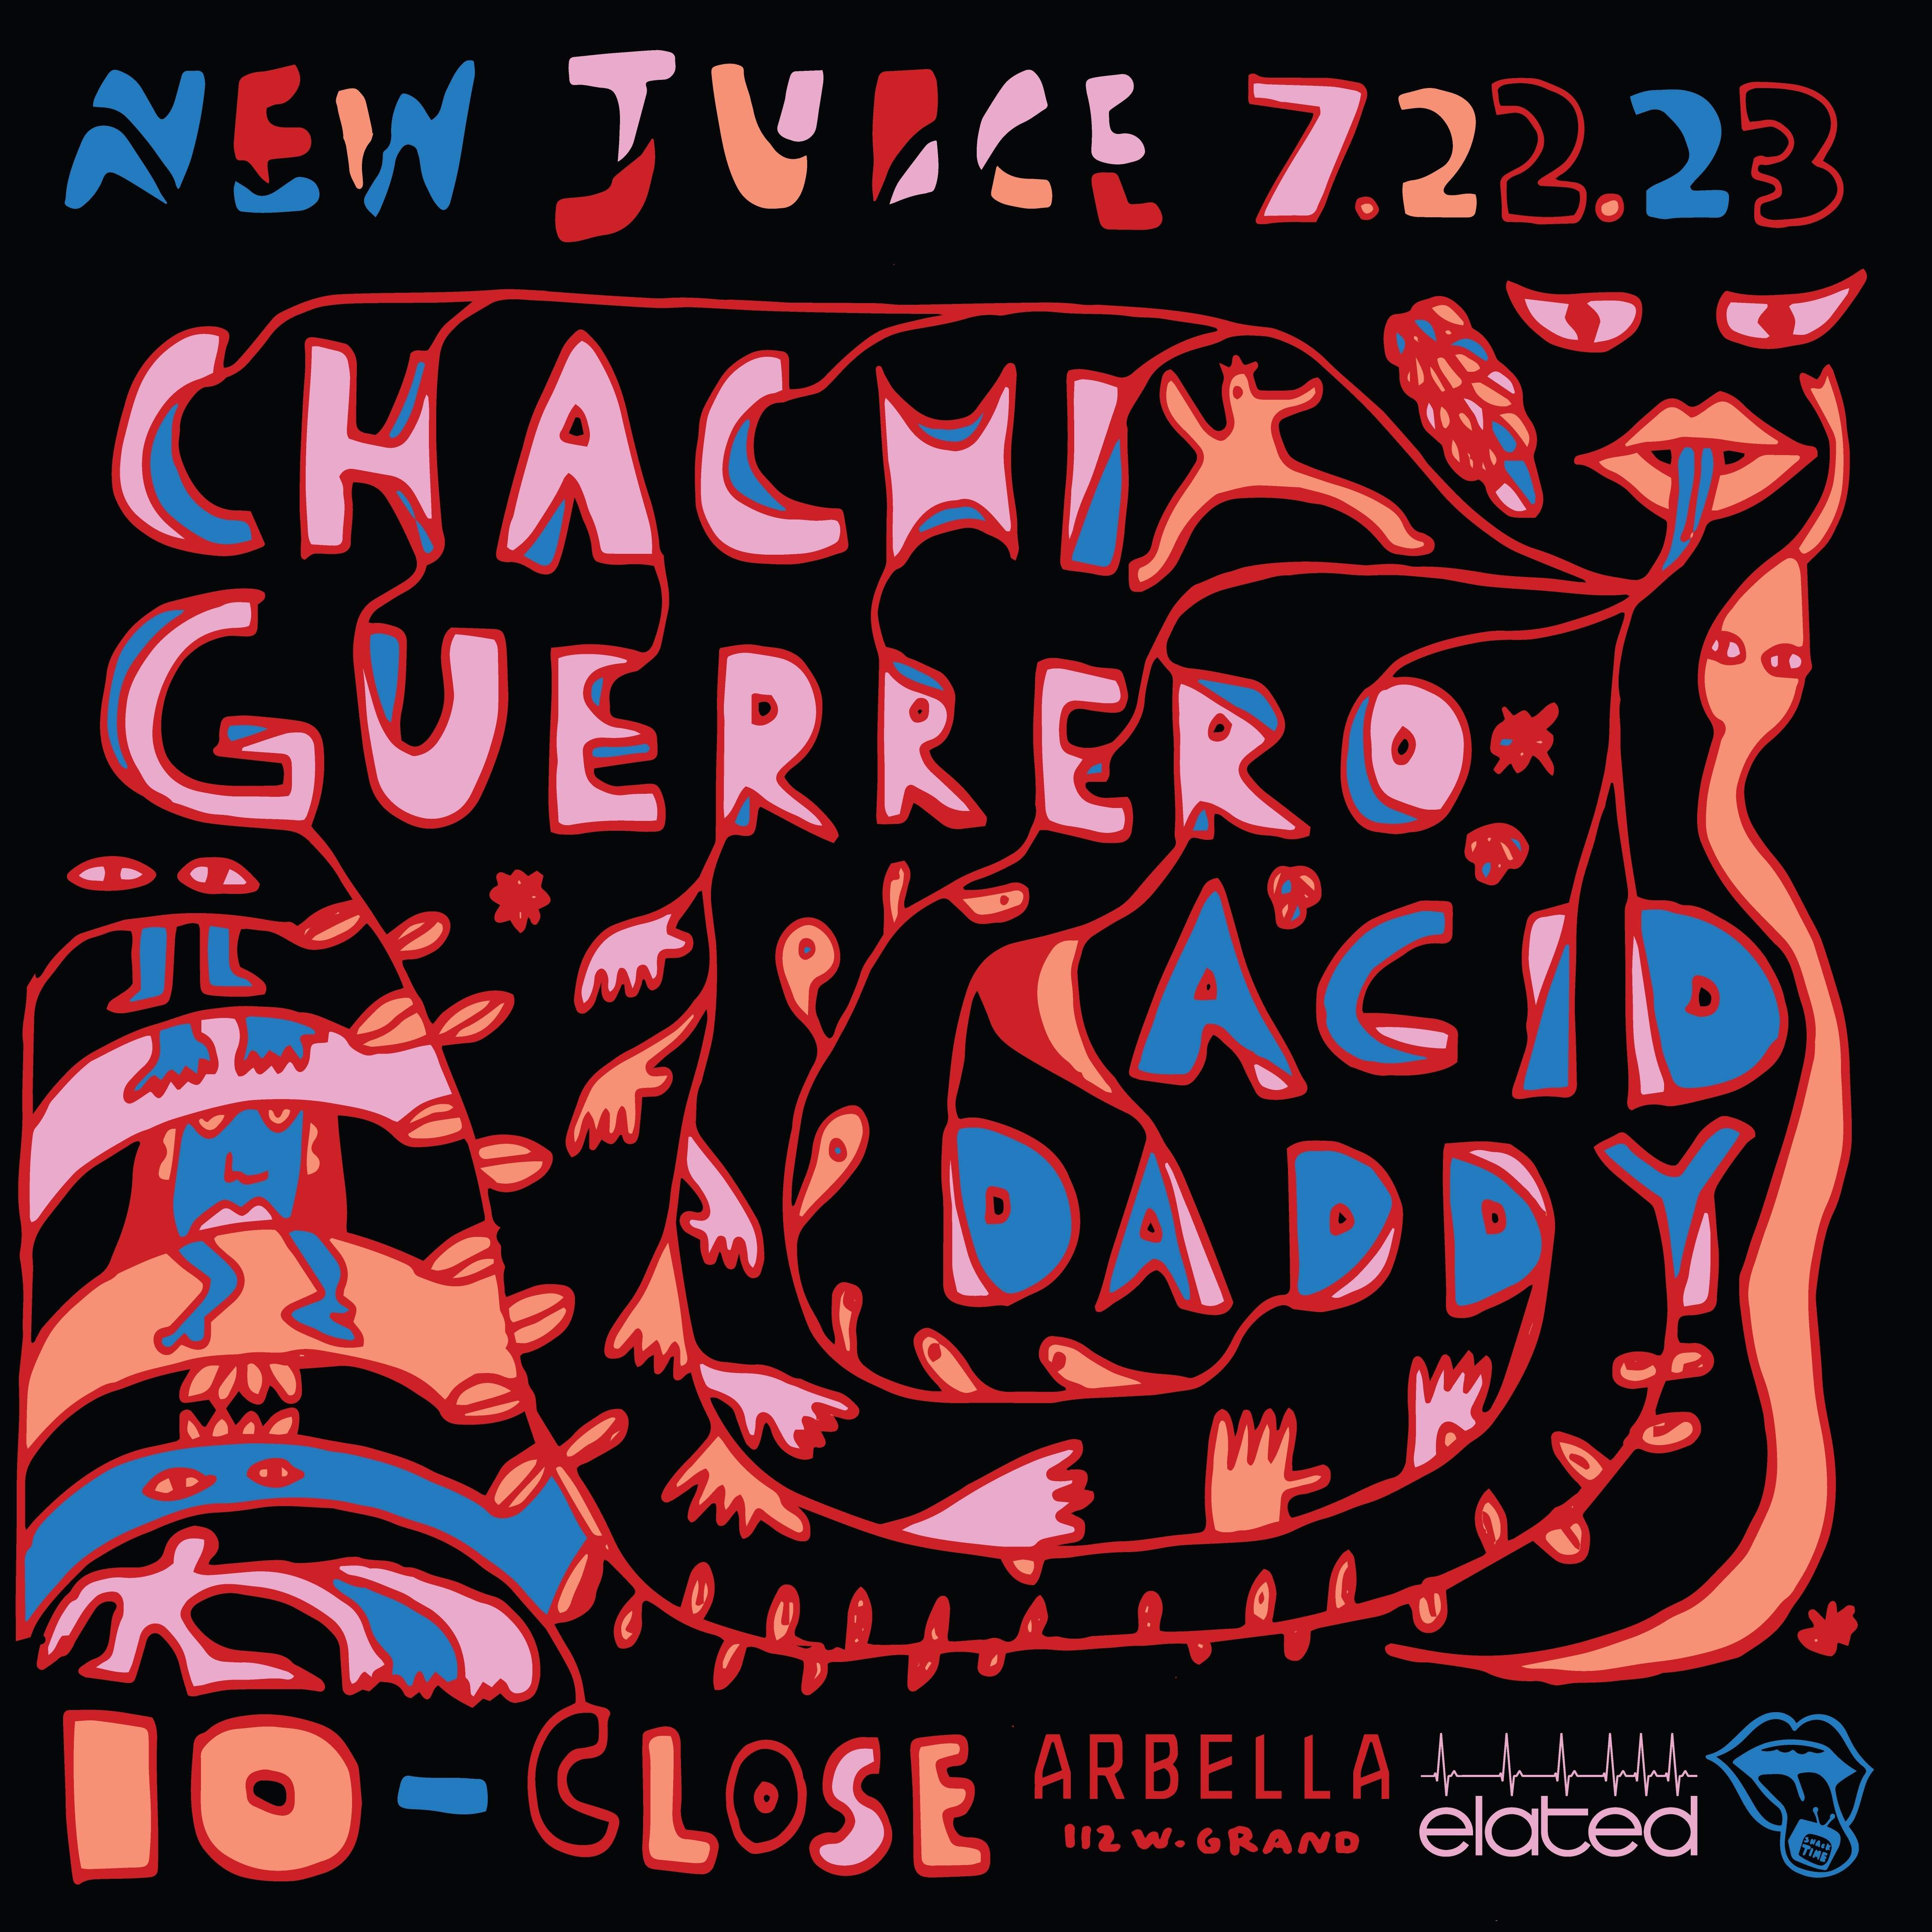 New Juice: with Chachi Guerrero and Acid Daddy - Página frontal